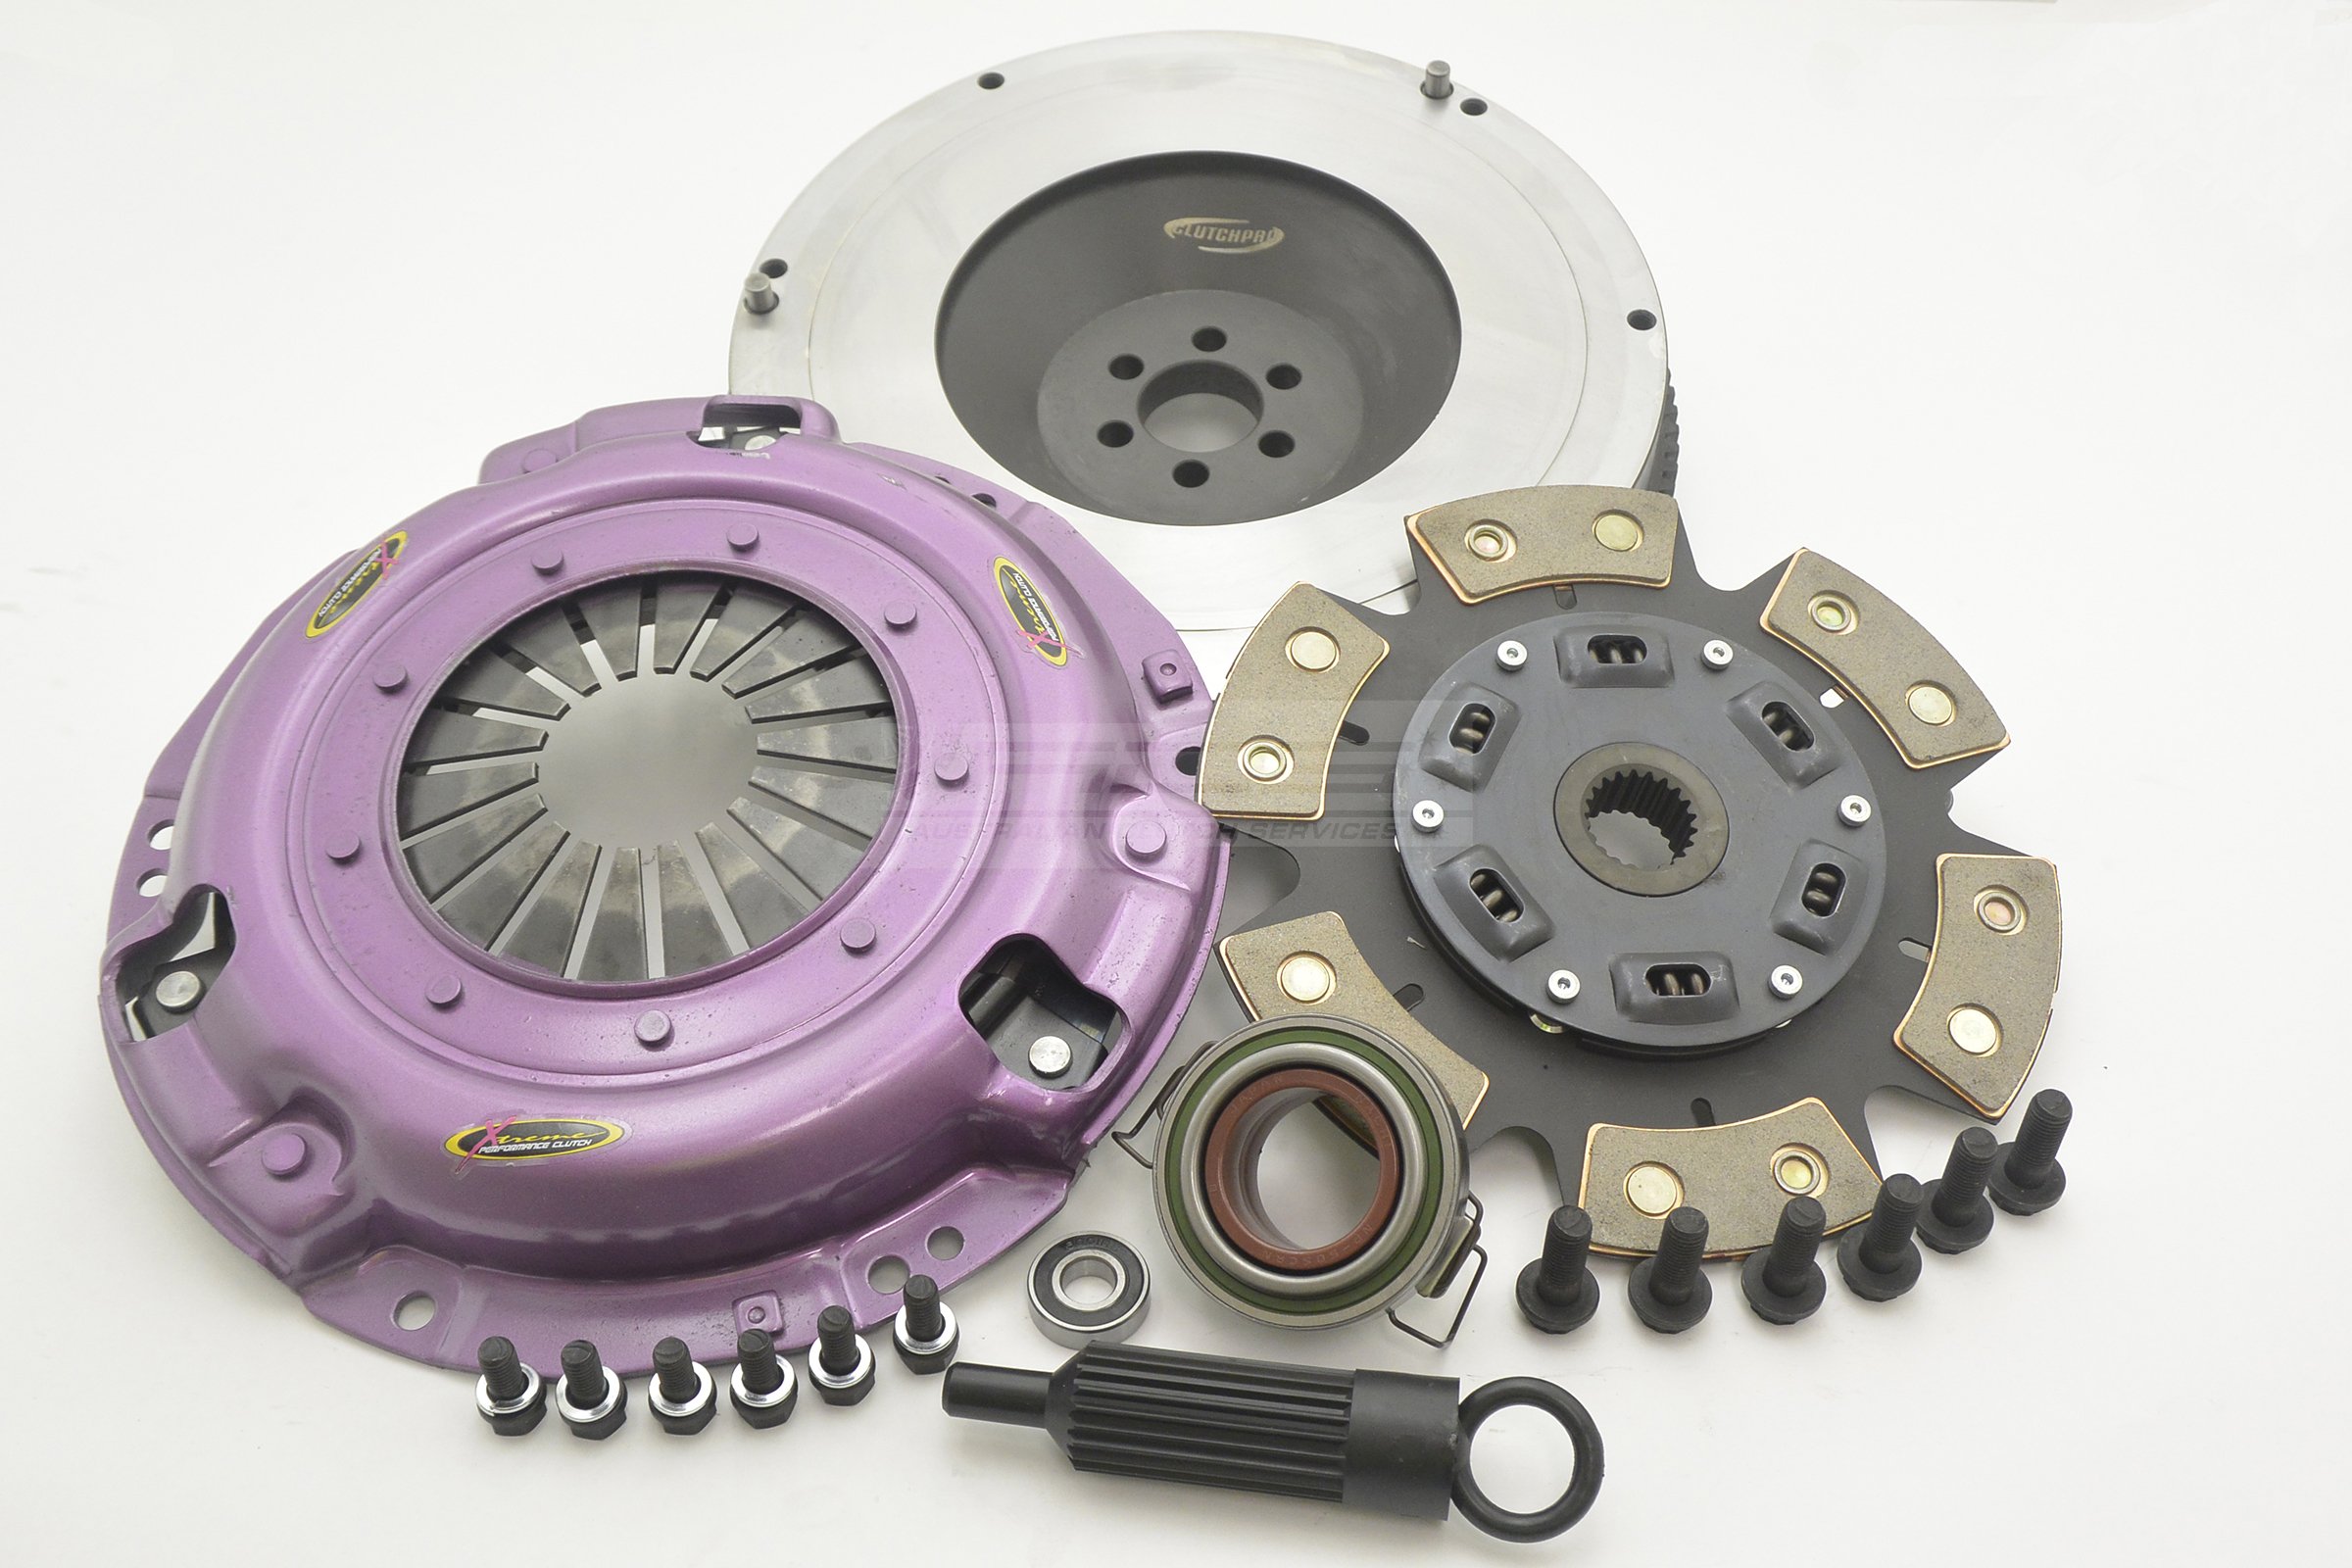 Clutch Kit - Xtreme Performance Heavy Duty Sprung Ceramic Incl Flywheel 430Nm IS 200 200 (GXE10)